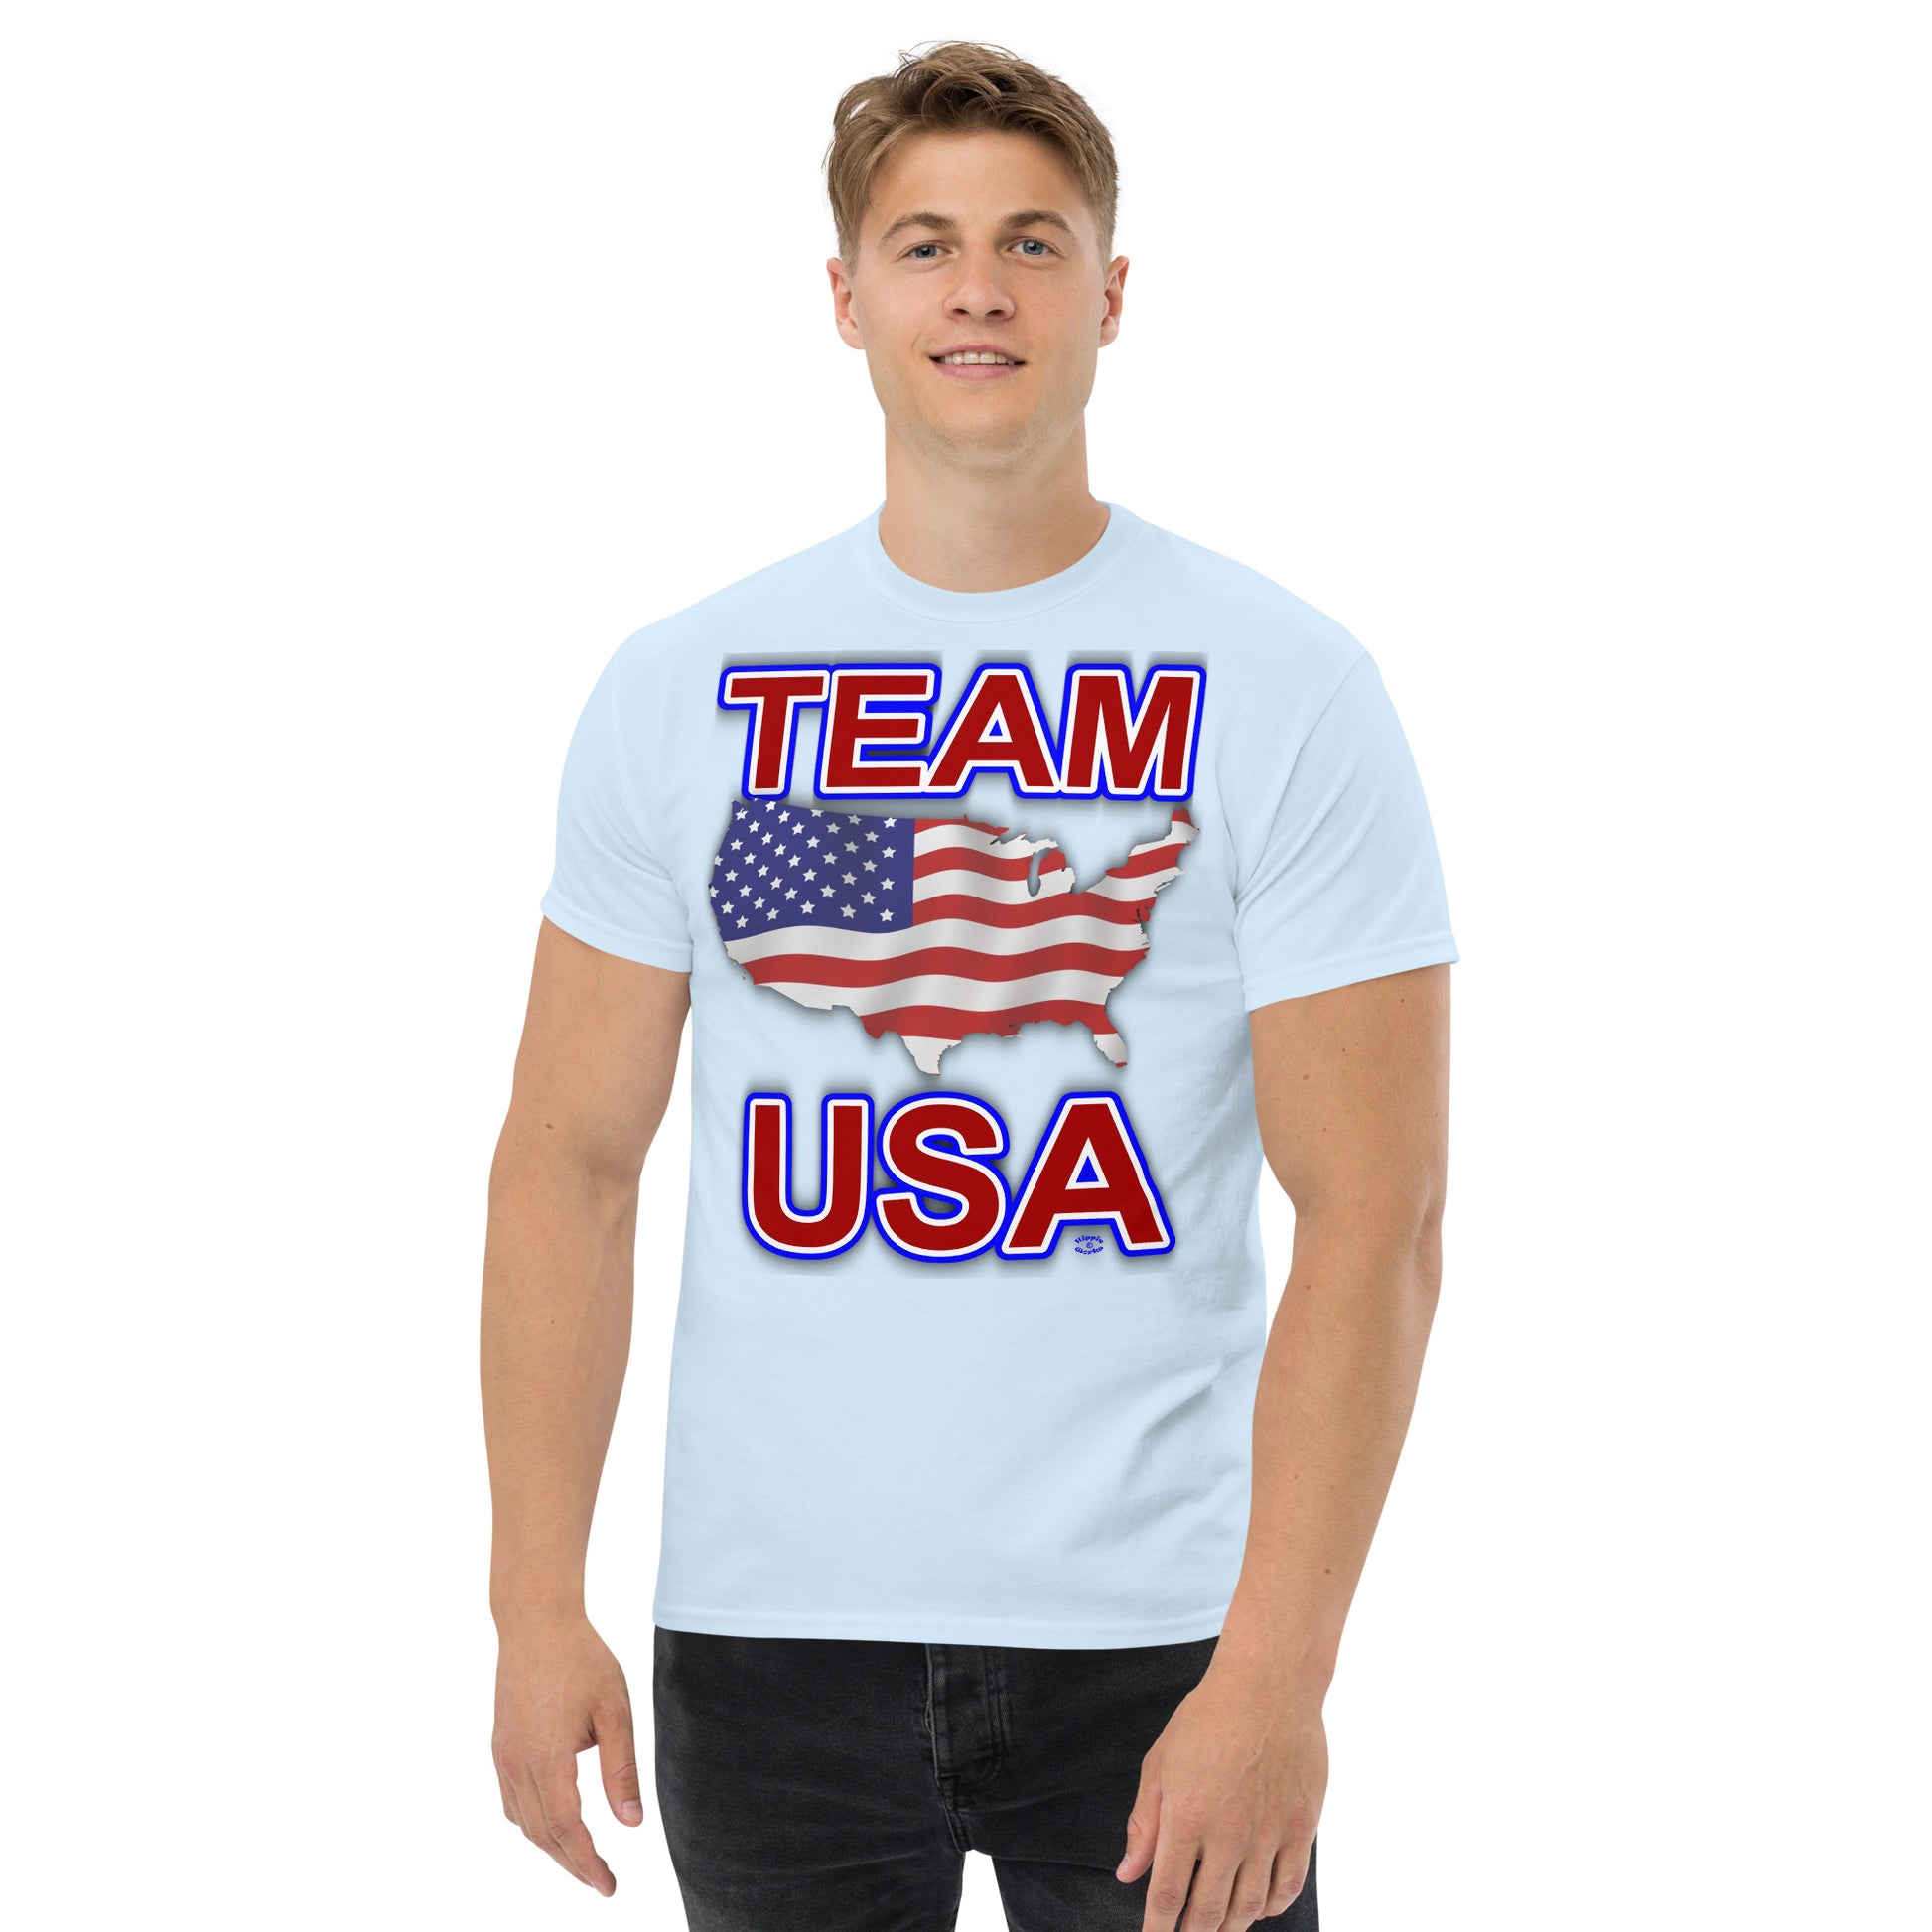 A Picture of a man wearing a tshirt with an american flag usa map with team USA written in red, white and blue - ft - light blue